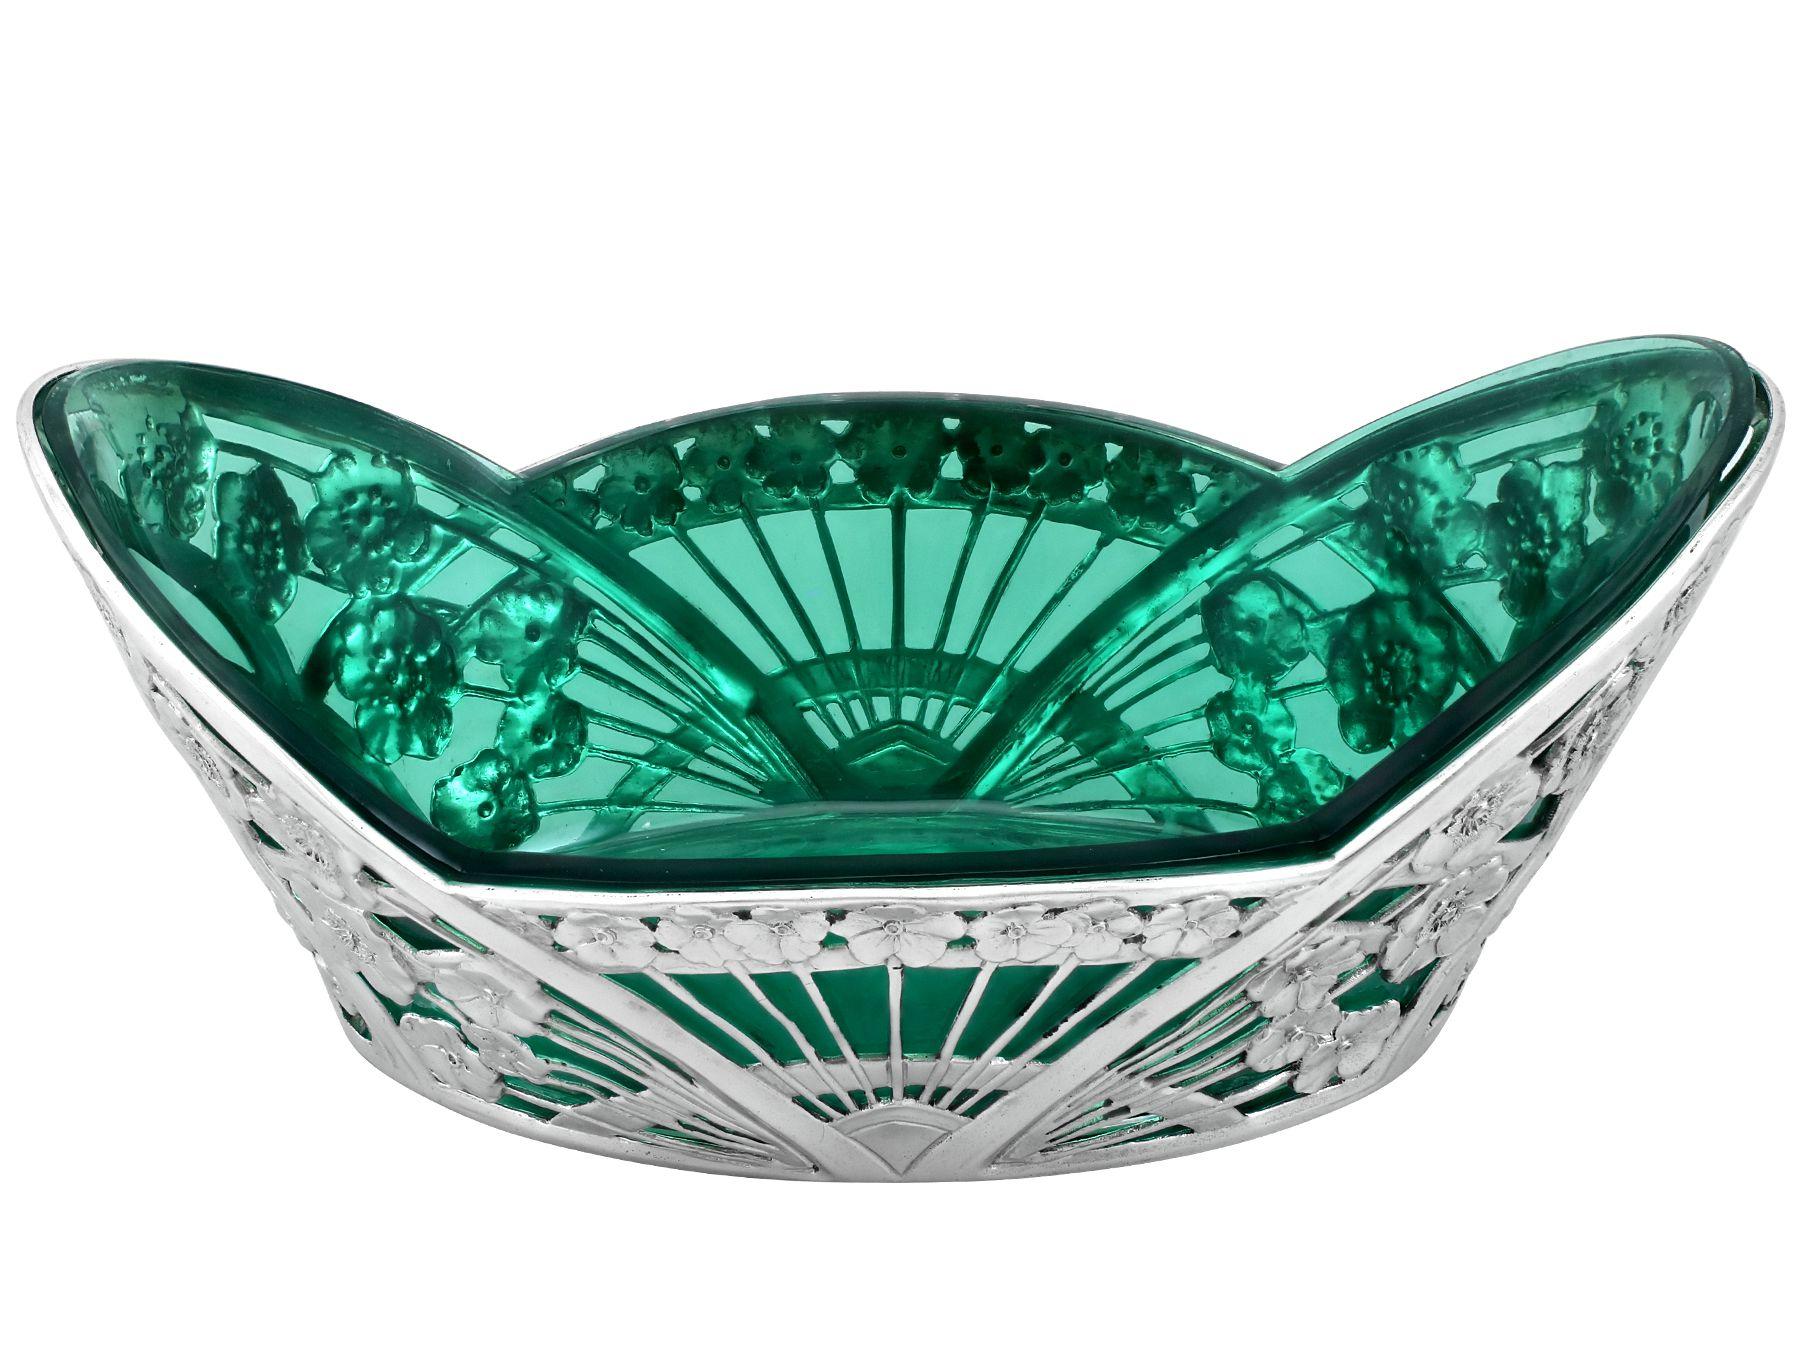 An exceptional, fine and impressive antique German silver and green glass Art Deco dish/centrepiece; an addition to our range of continental dining silverware

This exceptional antique German silver dish has an oval boat shaped form.

The body